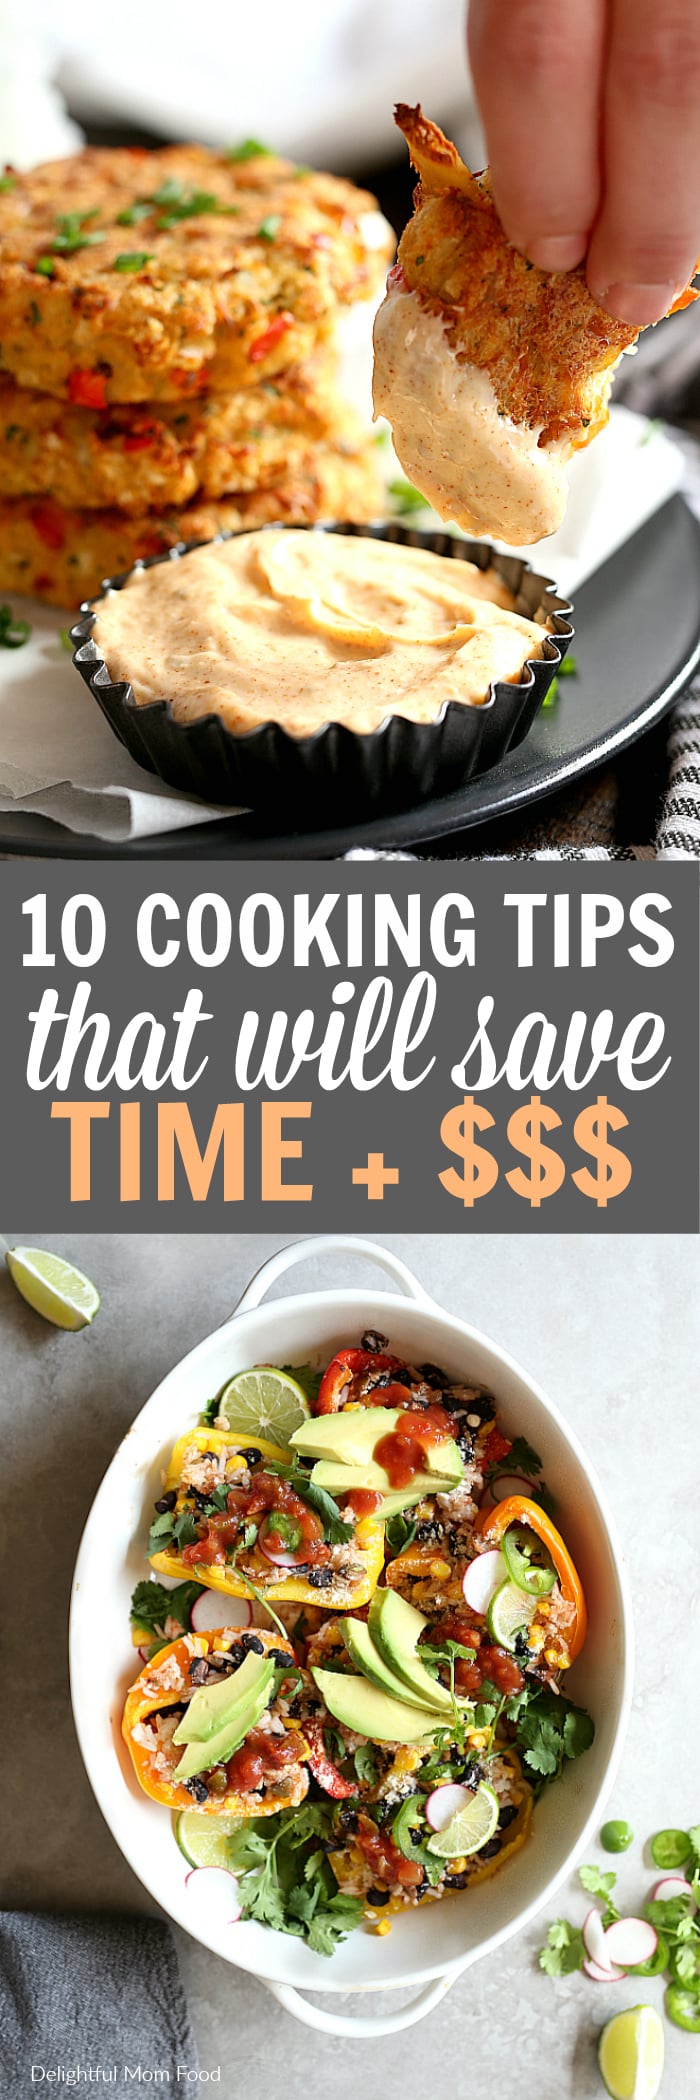 Cooking tips that are tried and true to save you time in the kitchen. These routines will help simplify meals, make your time more efficient and help you cook with confidence. #cooking #tips #save #time #money | Article at delightfulmomfood.com